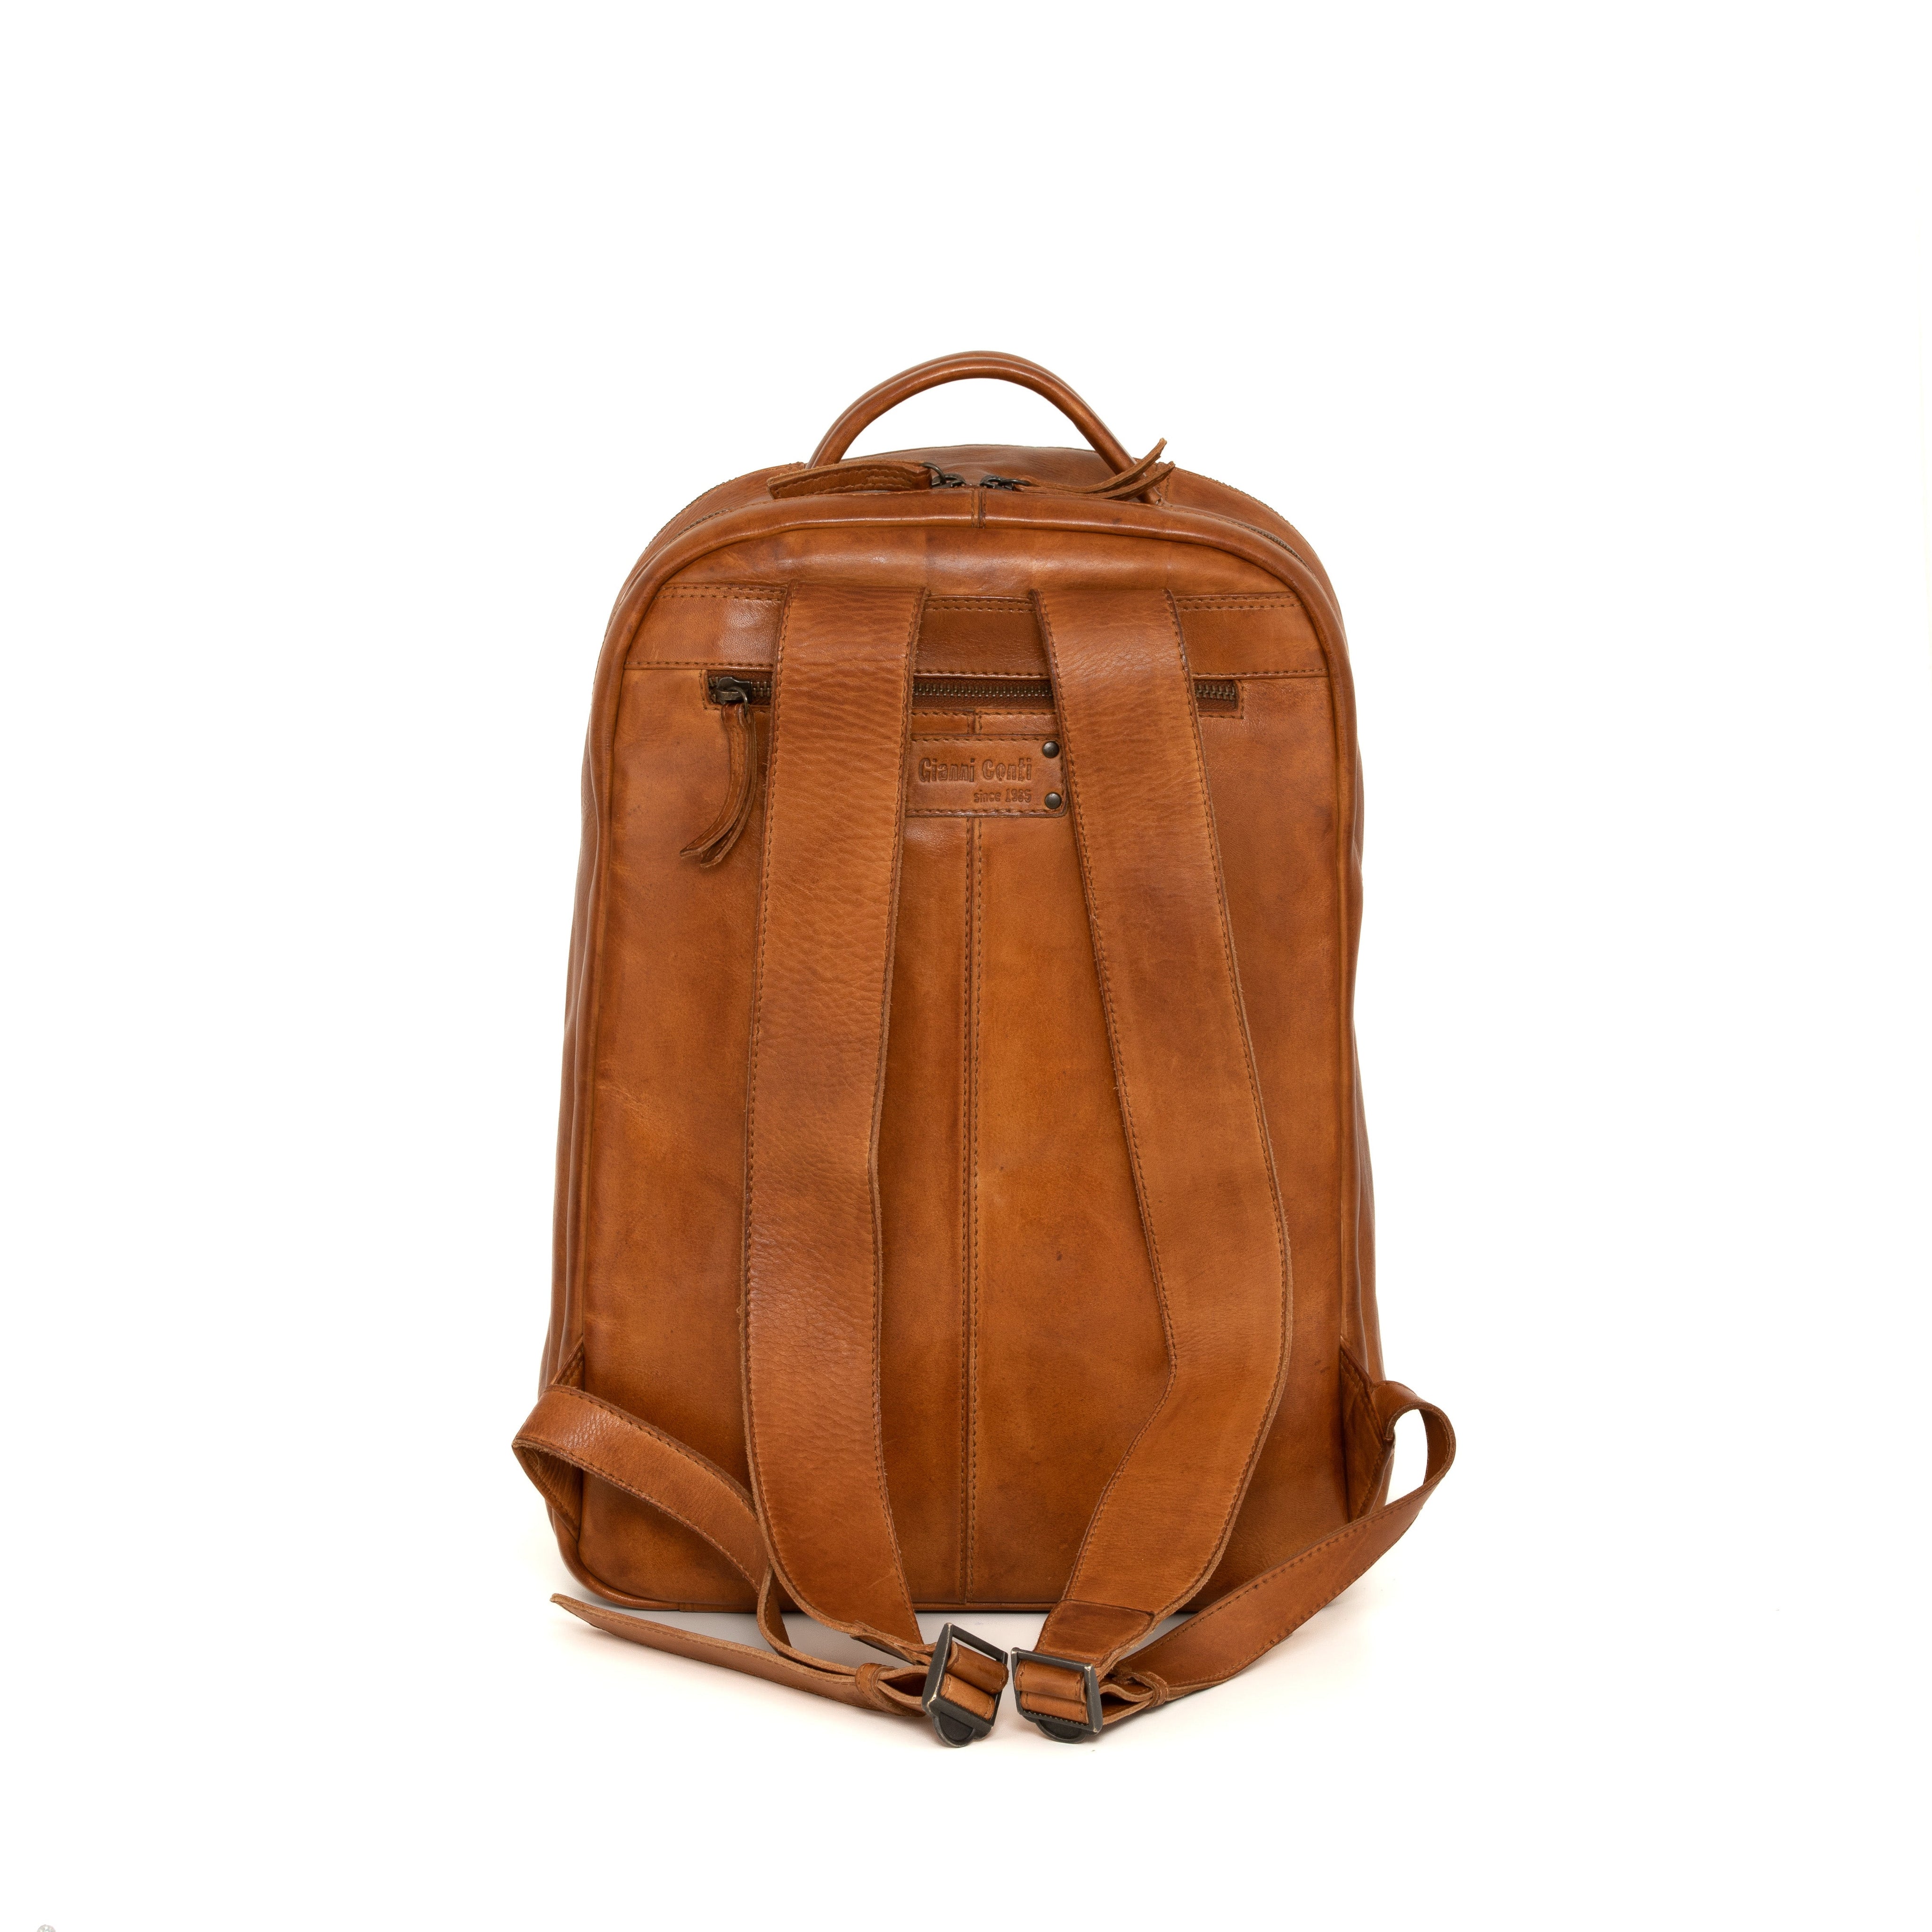 Gianni Conti Cherry Leather Backpack